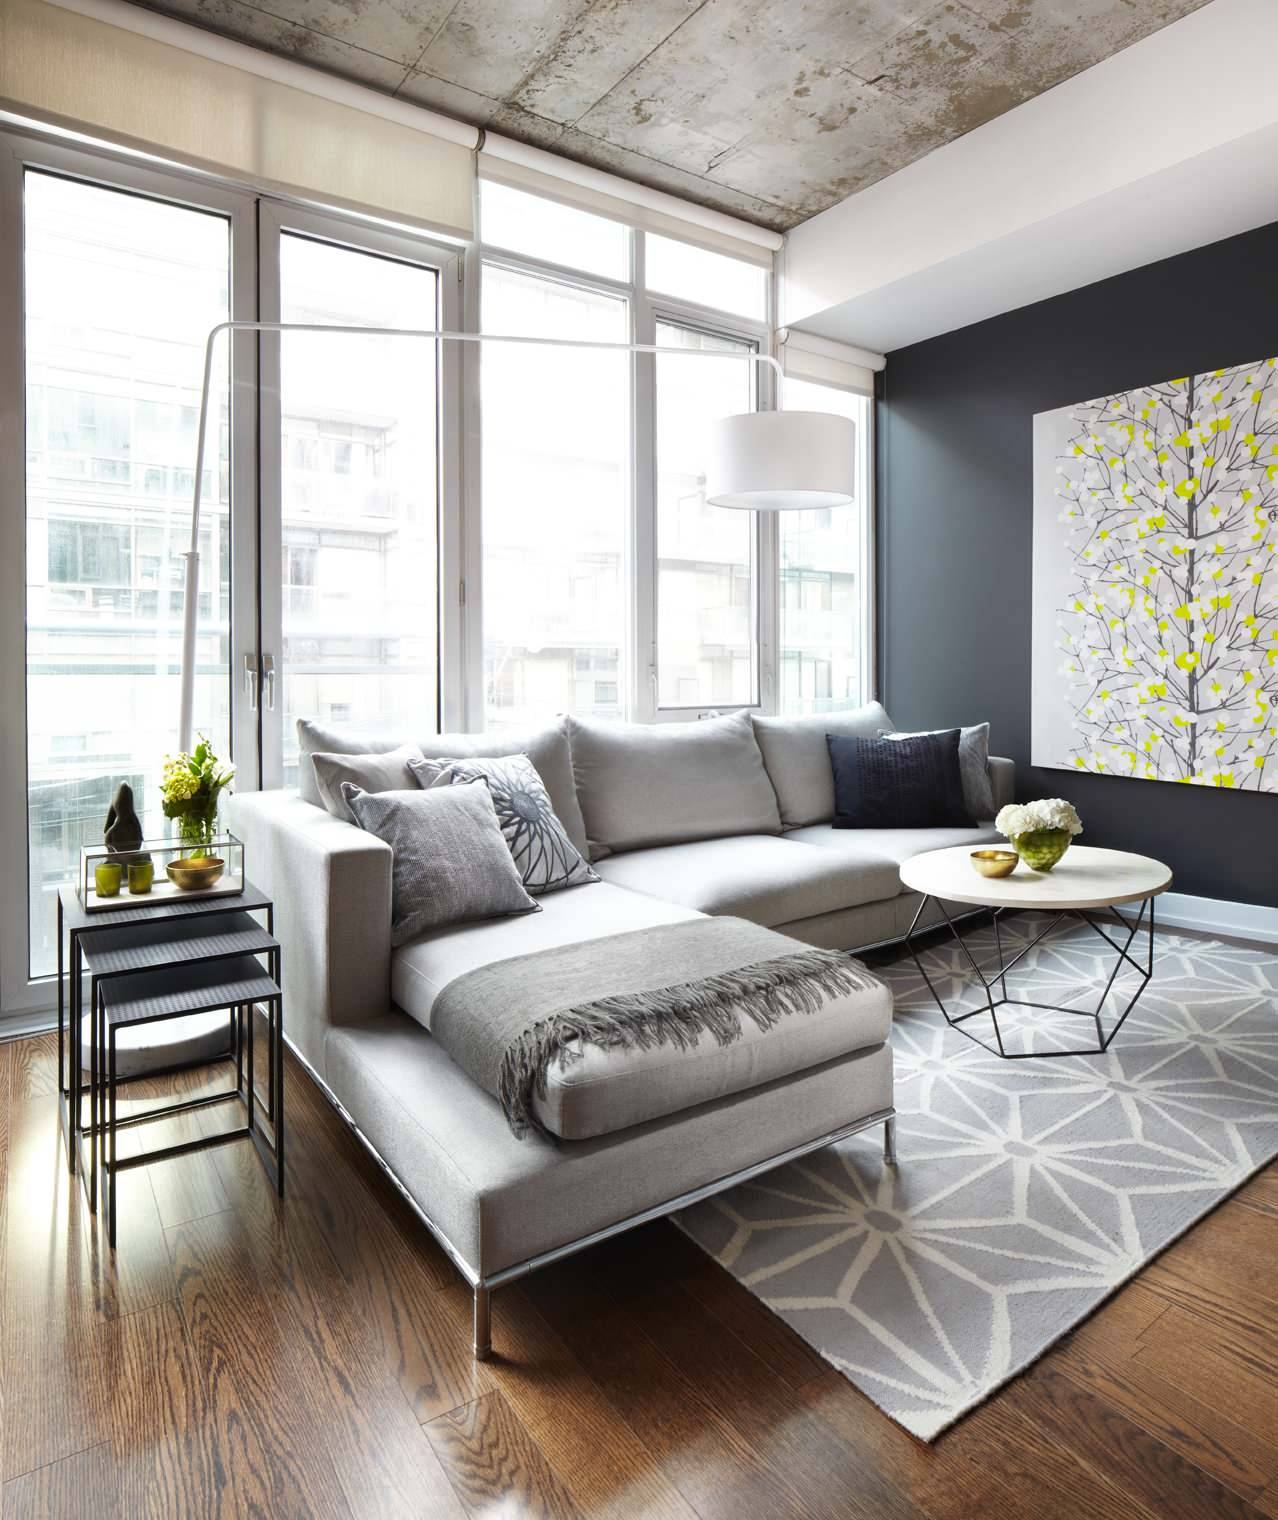 Accent wall in a dark color will add dimension to the room (from Houzz)